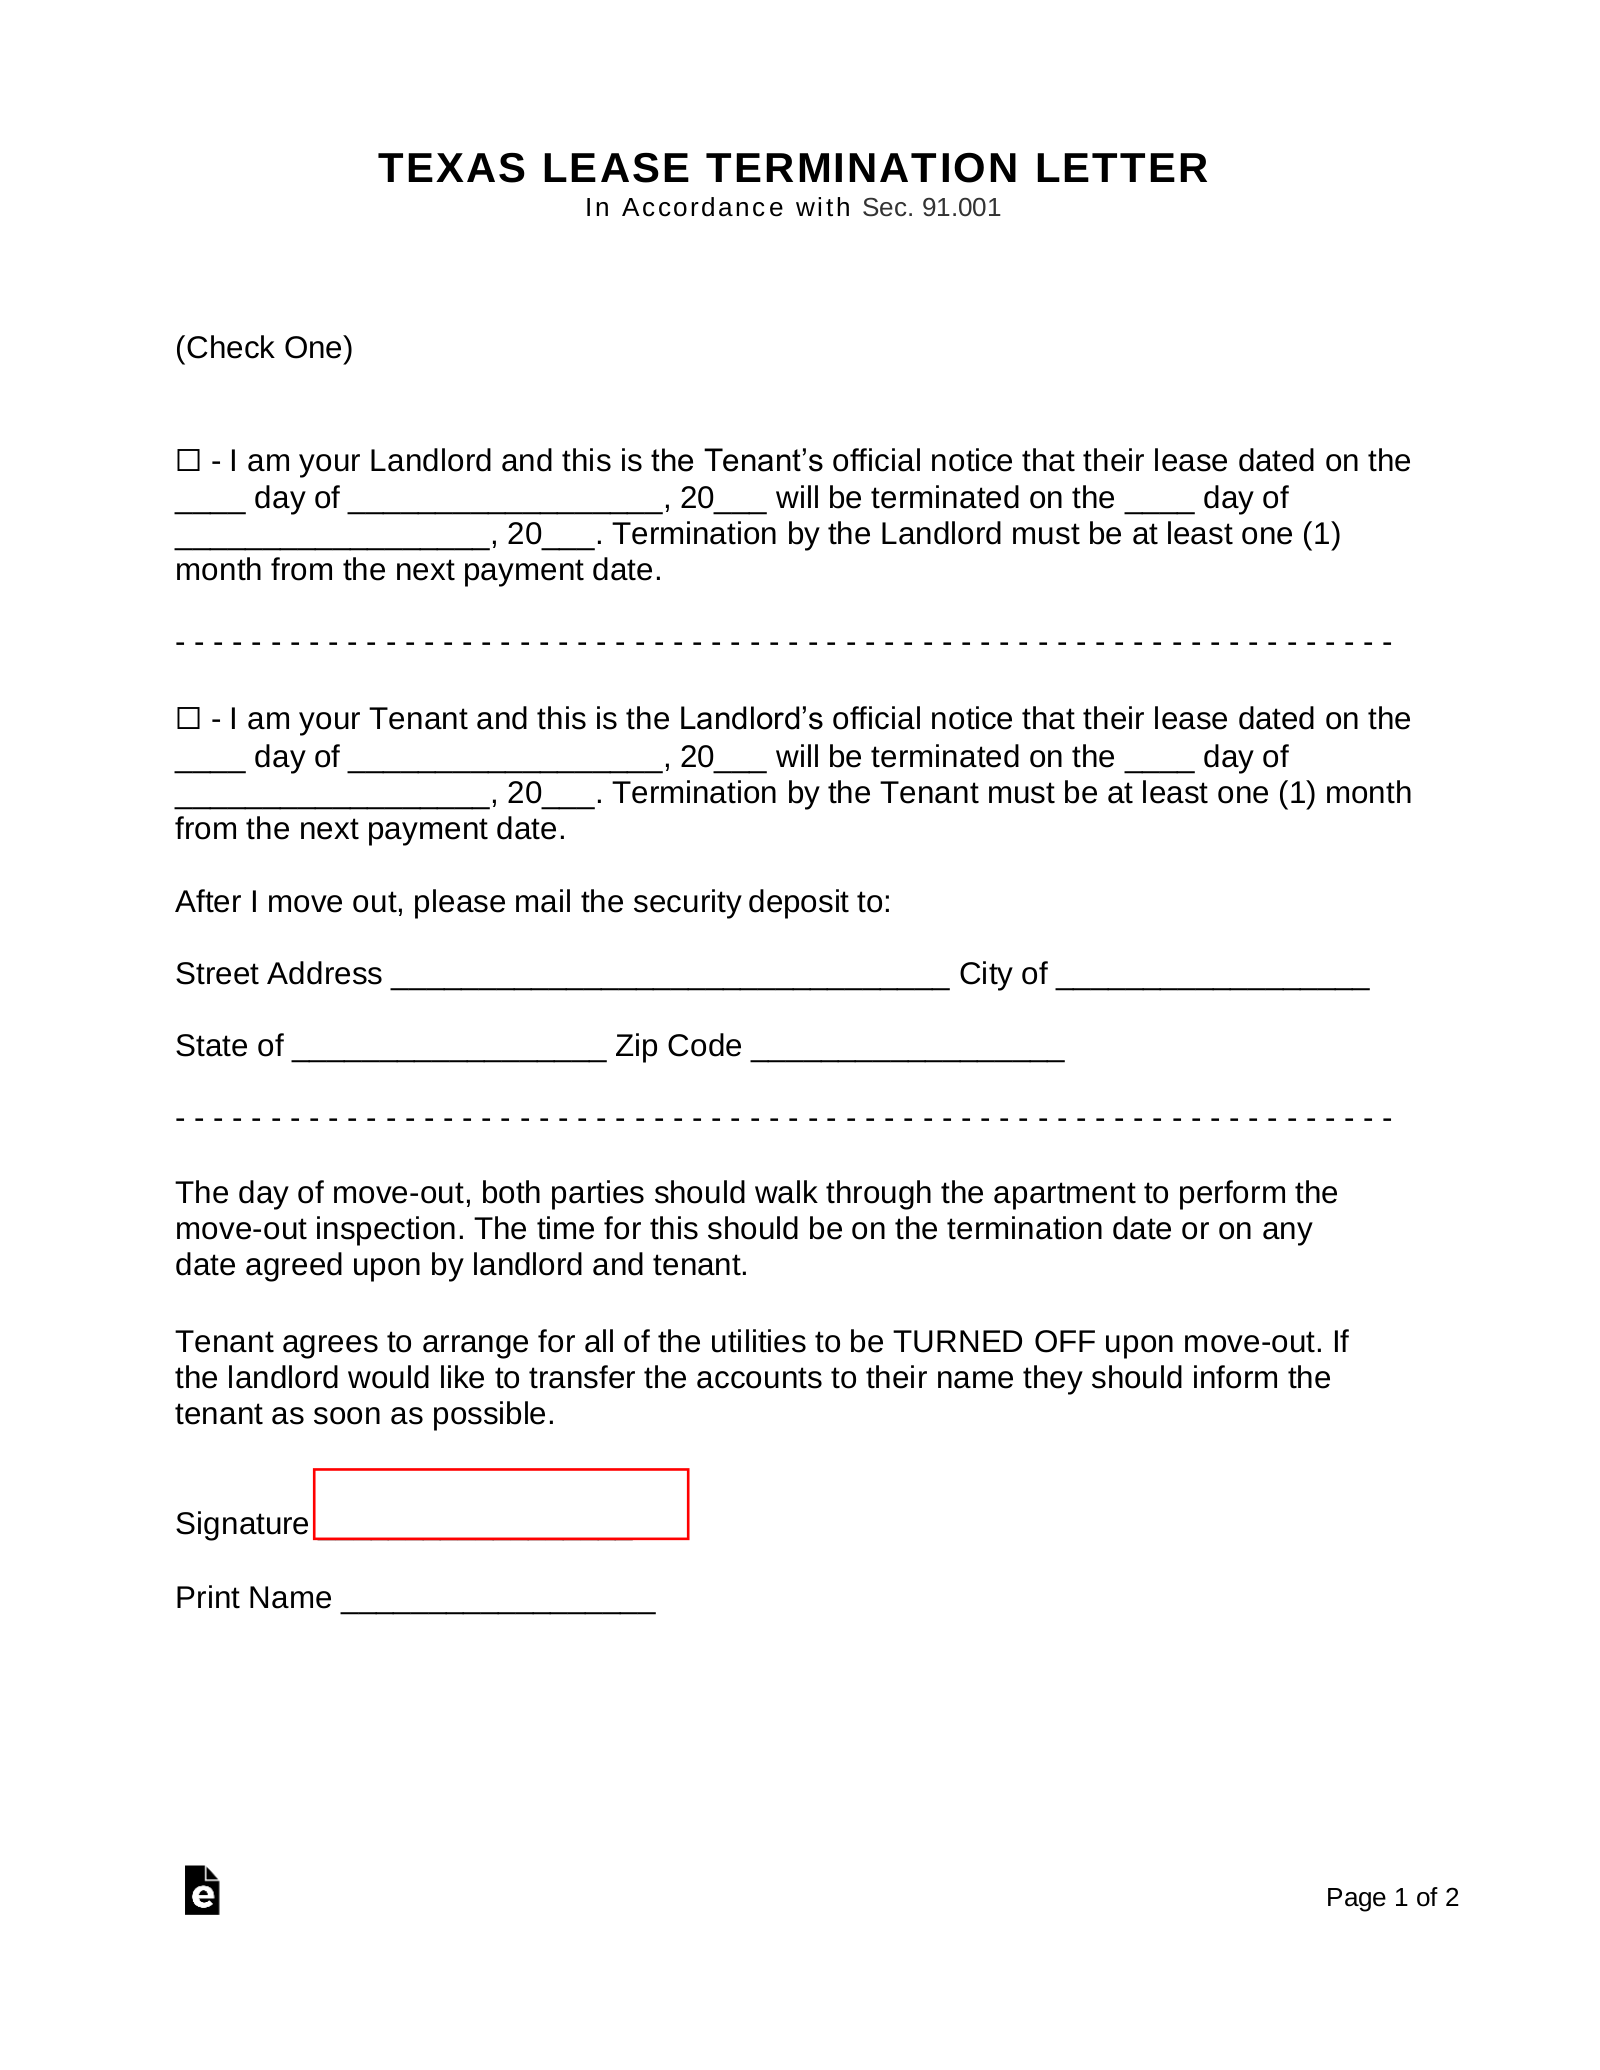 Sample Move Out Letter To Landlord from eforms.com